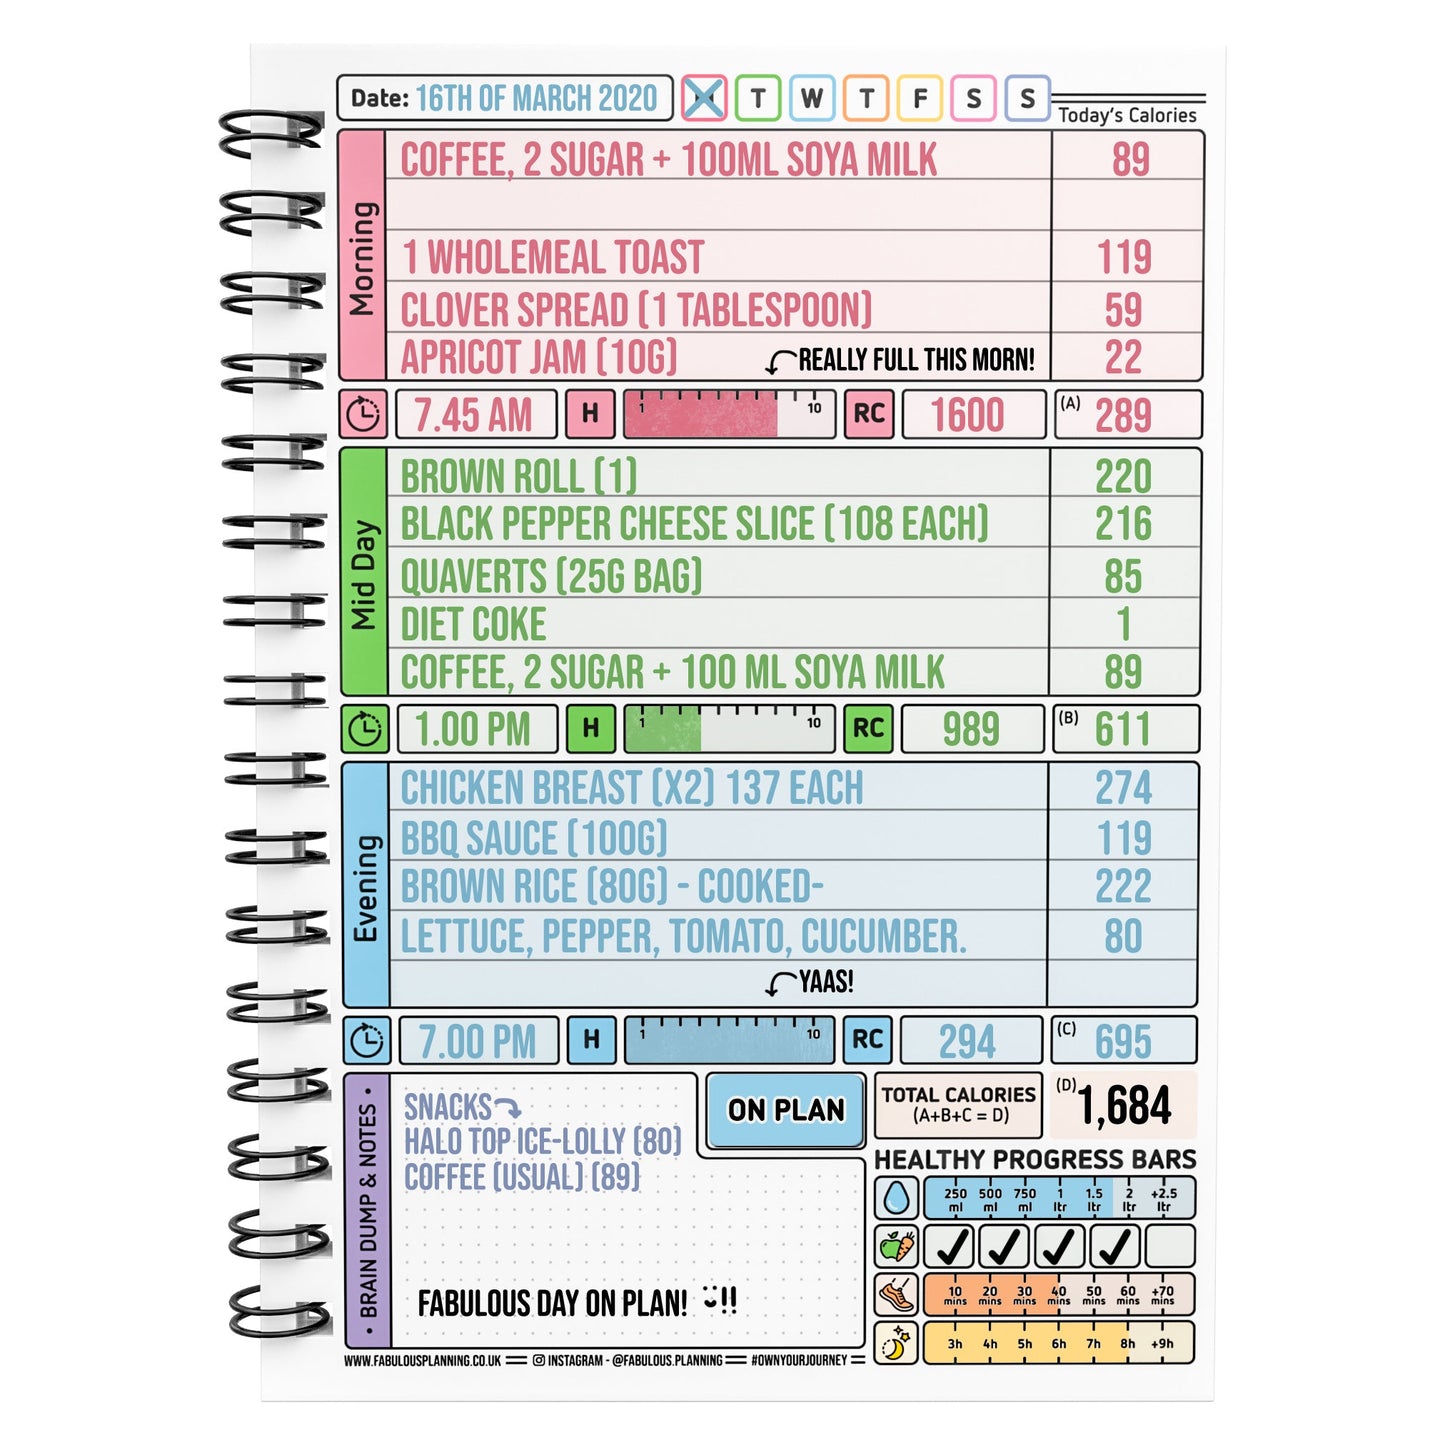 Food Diary - C3 - Calorie Counting - Fabulous Planning - [W] 3MTH - CAL - C3+